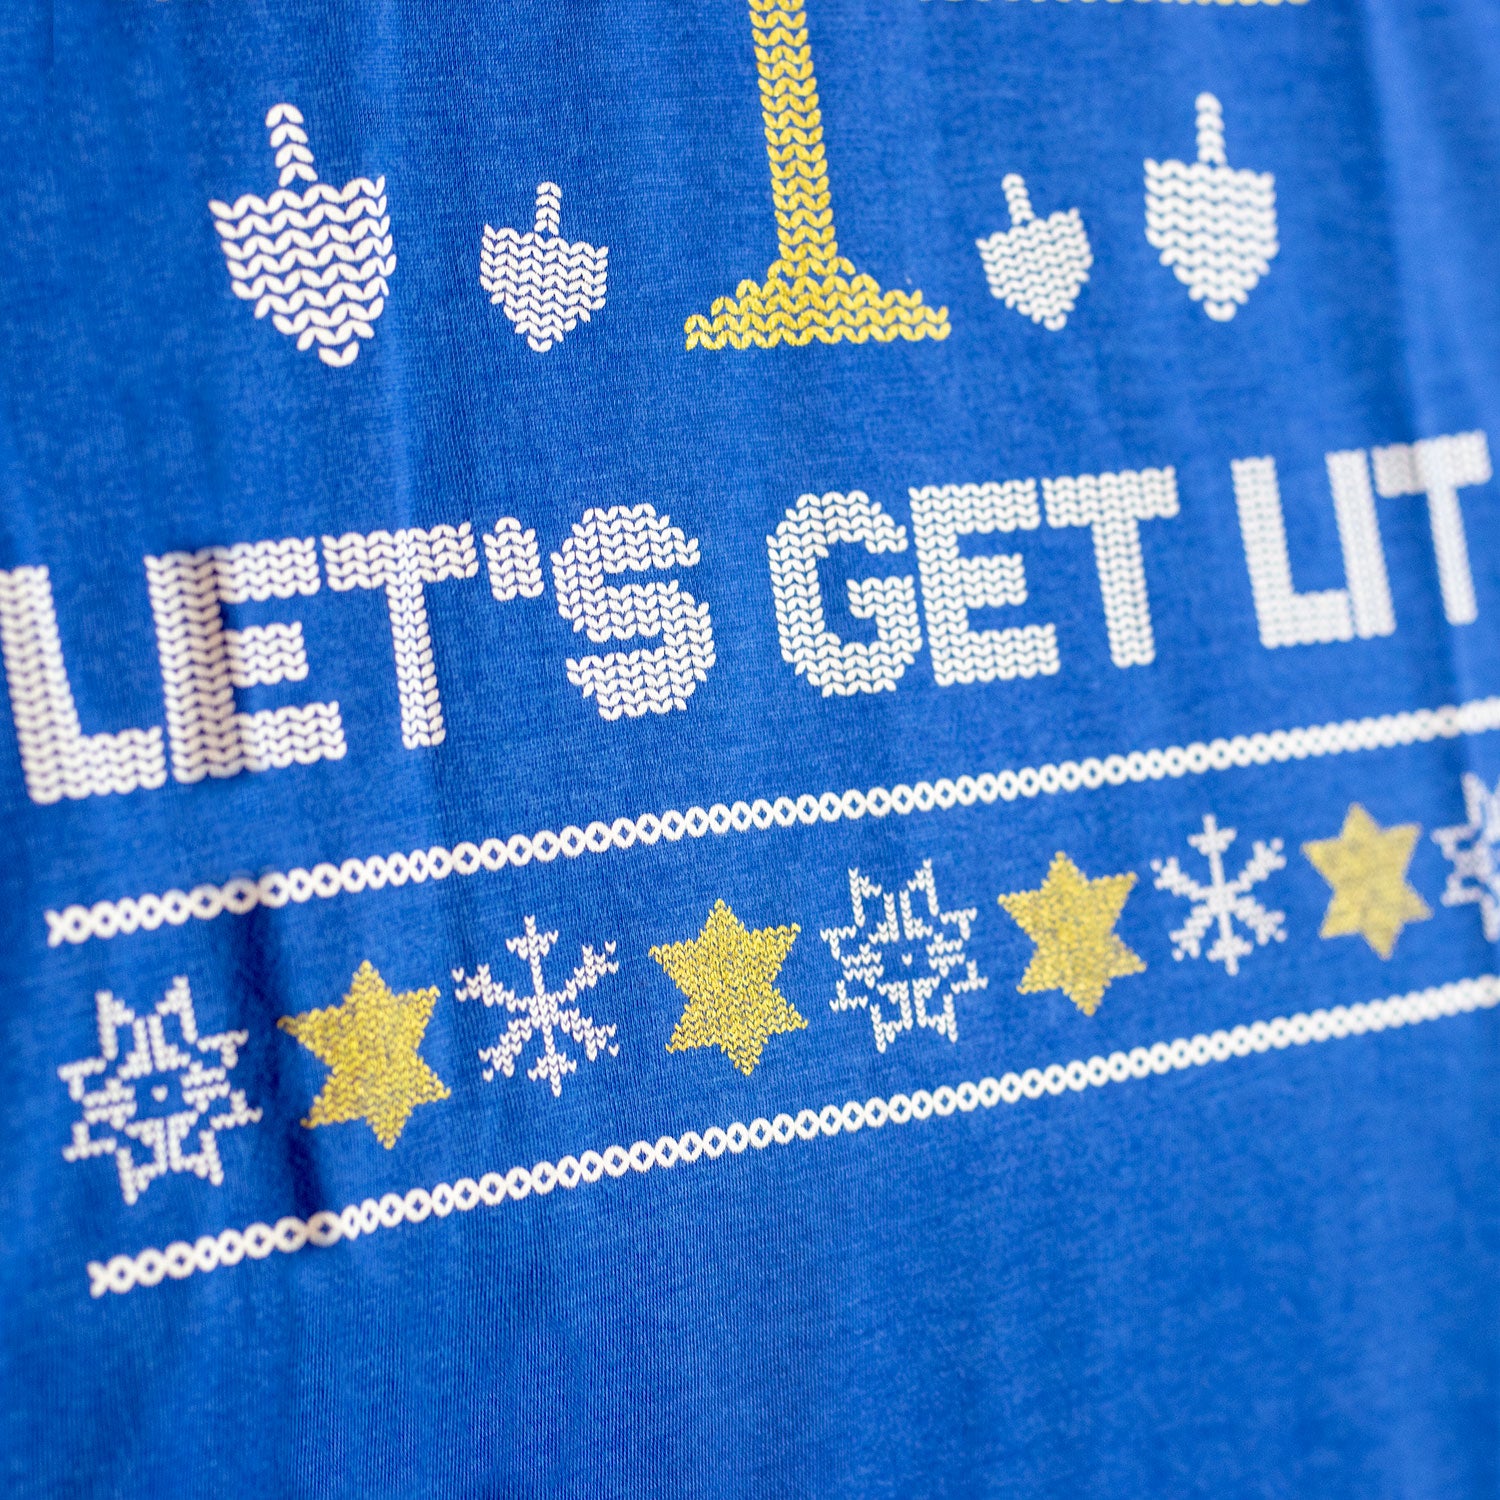 Happy Hanukkah - Let's Get Lit - Blue and Gold Unisex Holiday T-shirt (FREE SHIPPING), Shirt, HEED THE HUM